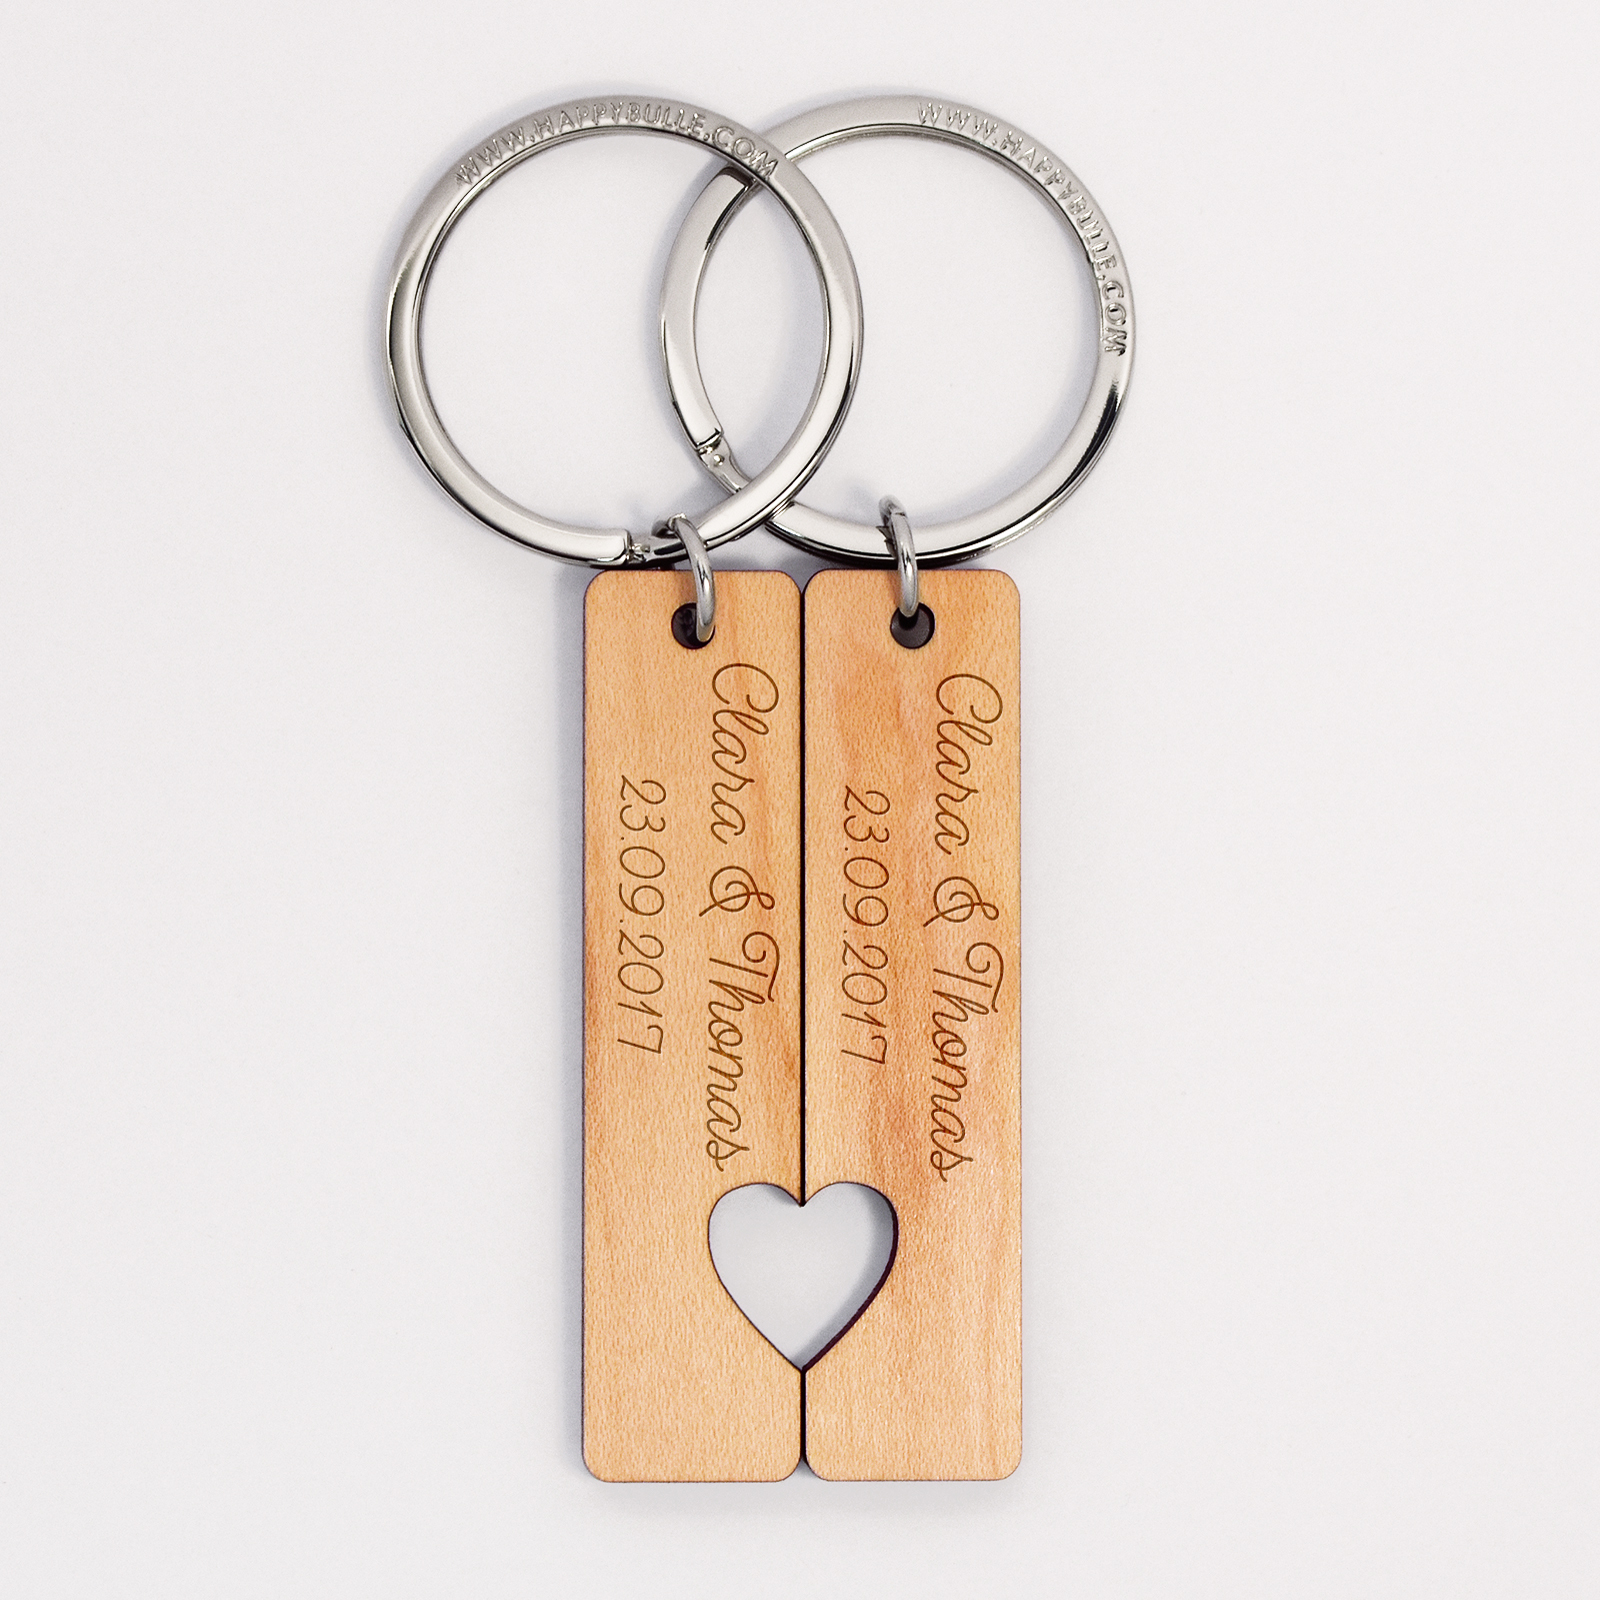 Pair of personalised engraved wooden plaque 16x66mm "for lovers" medallion keyrings - 1